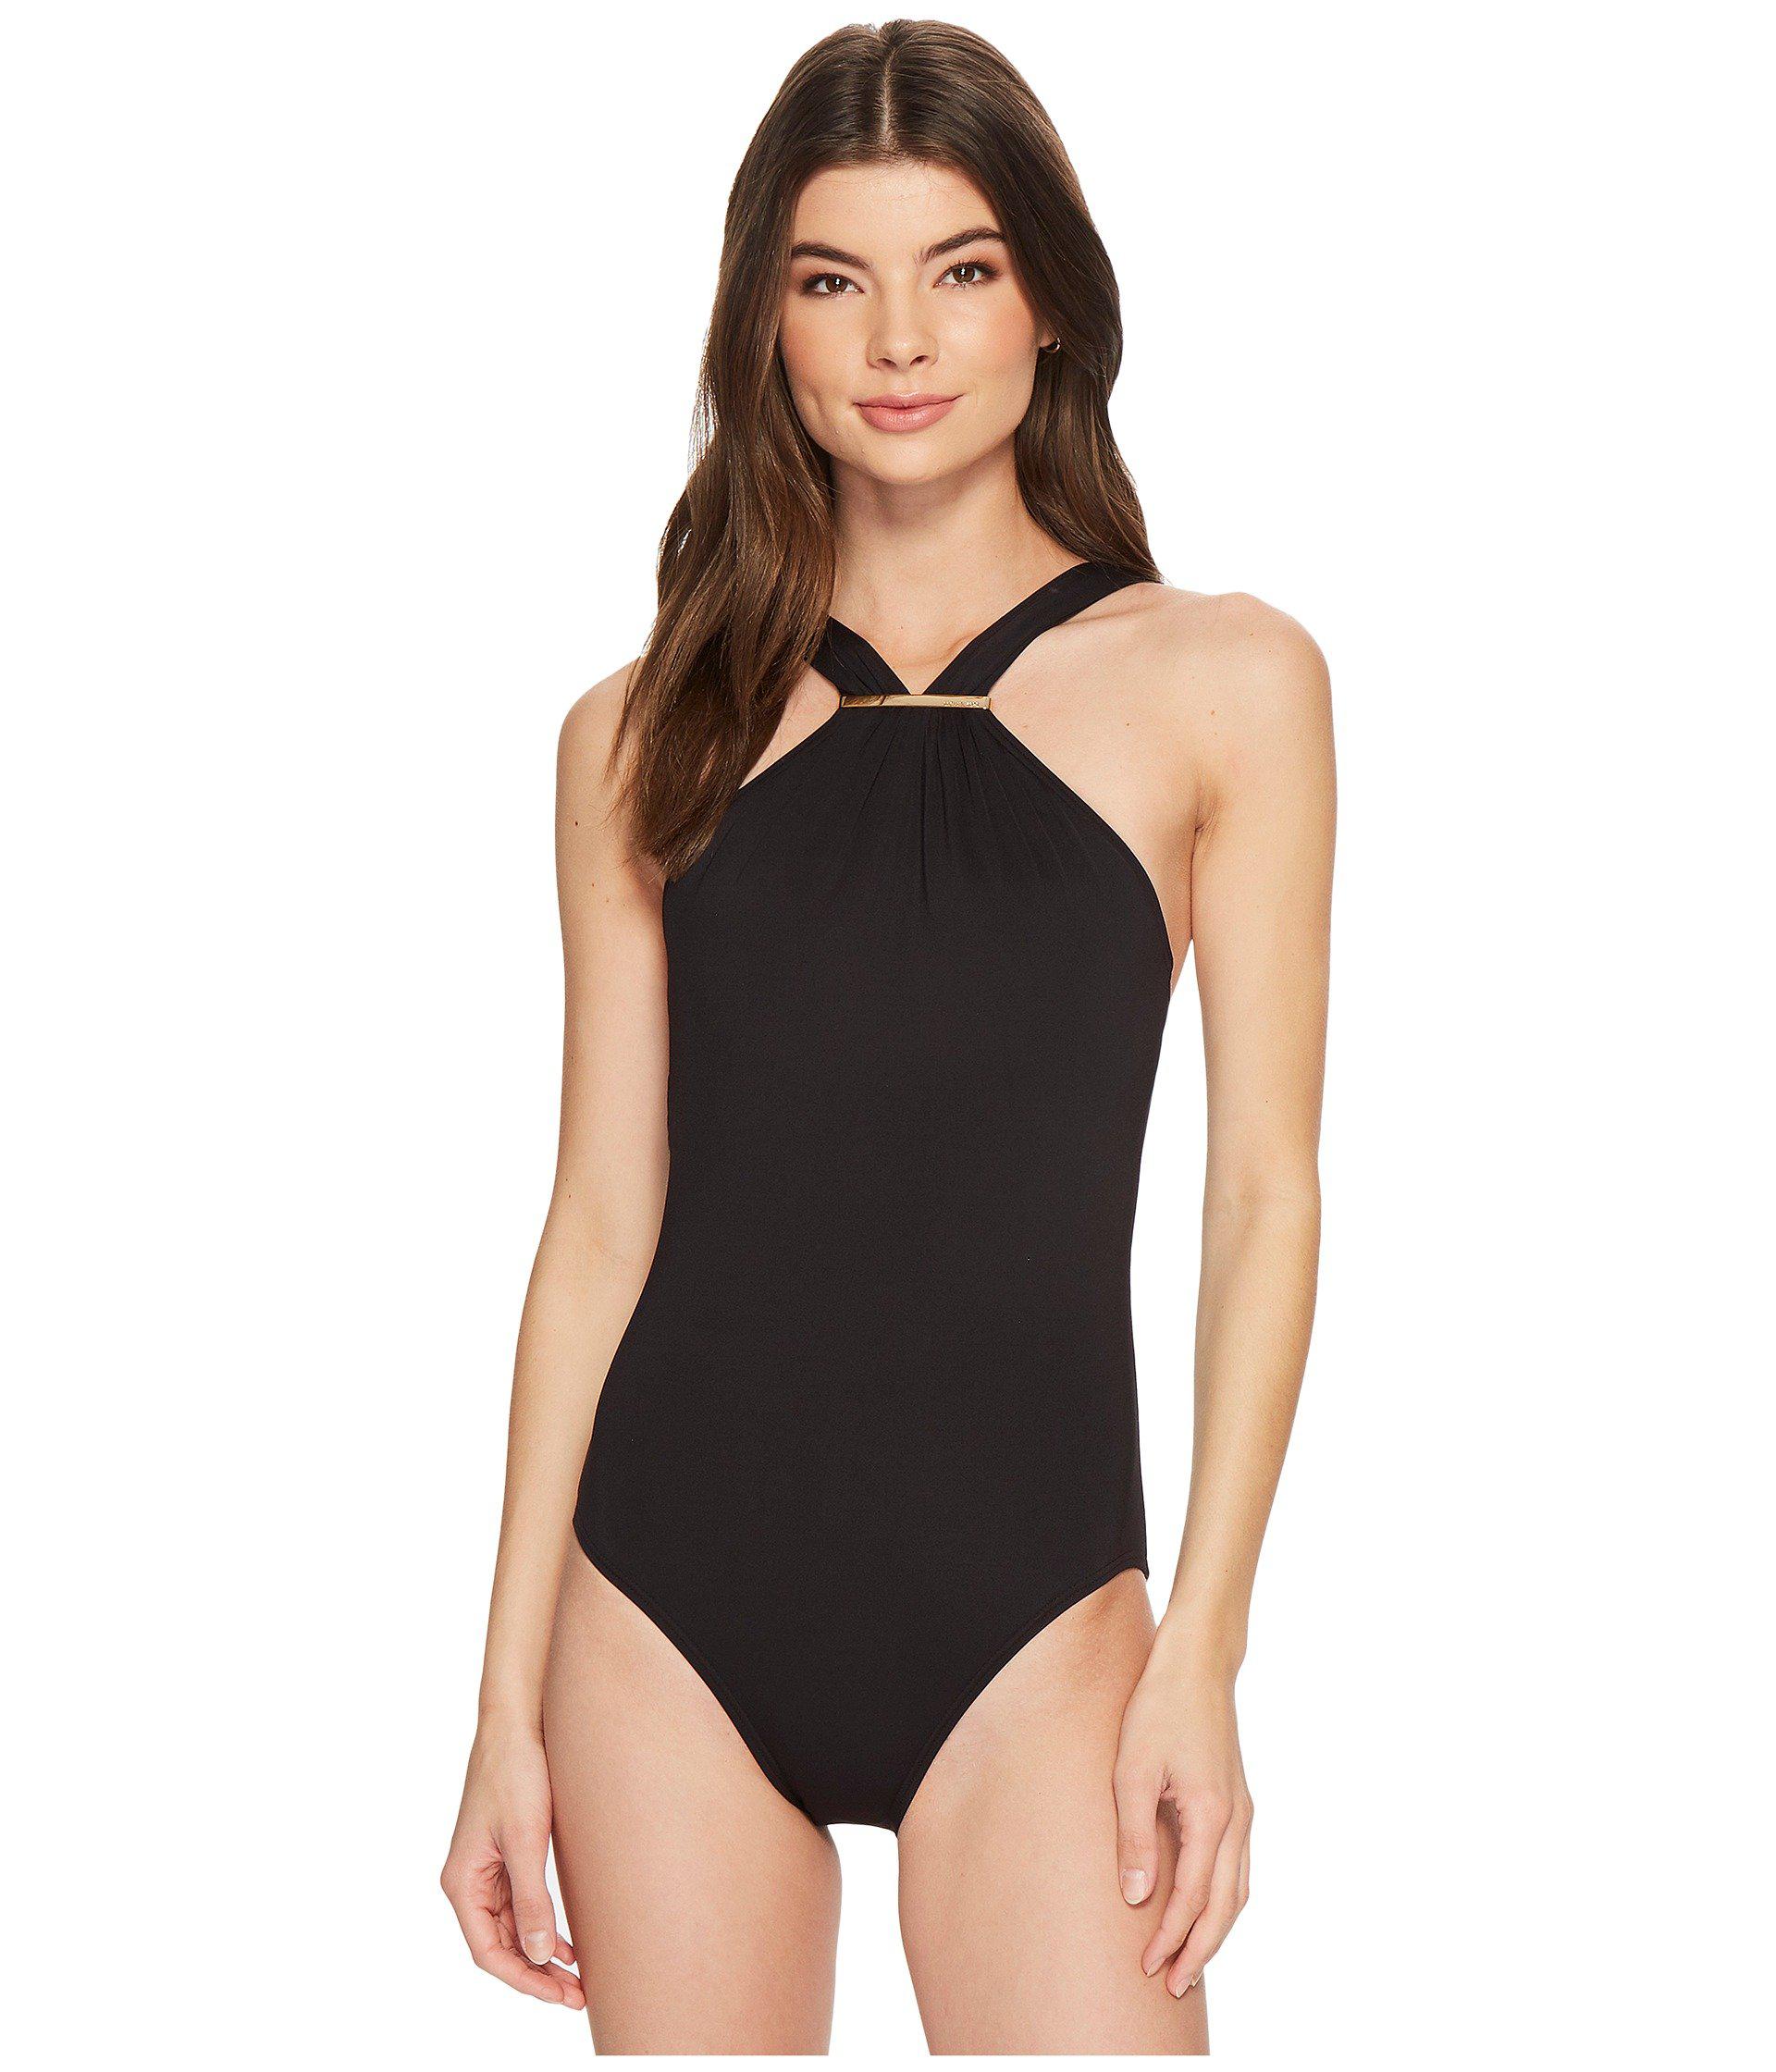 https://cdna.lystit.com/photos/zappos/09437f65/michael-by-michael-kors-Black-Iconic-Solids-Logo-Bar-High-Neck-One-piece-Swimsuit-W-Removable-Soft-Cups.jpeg